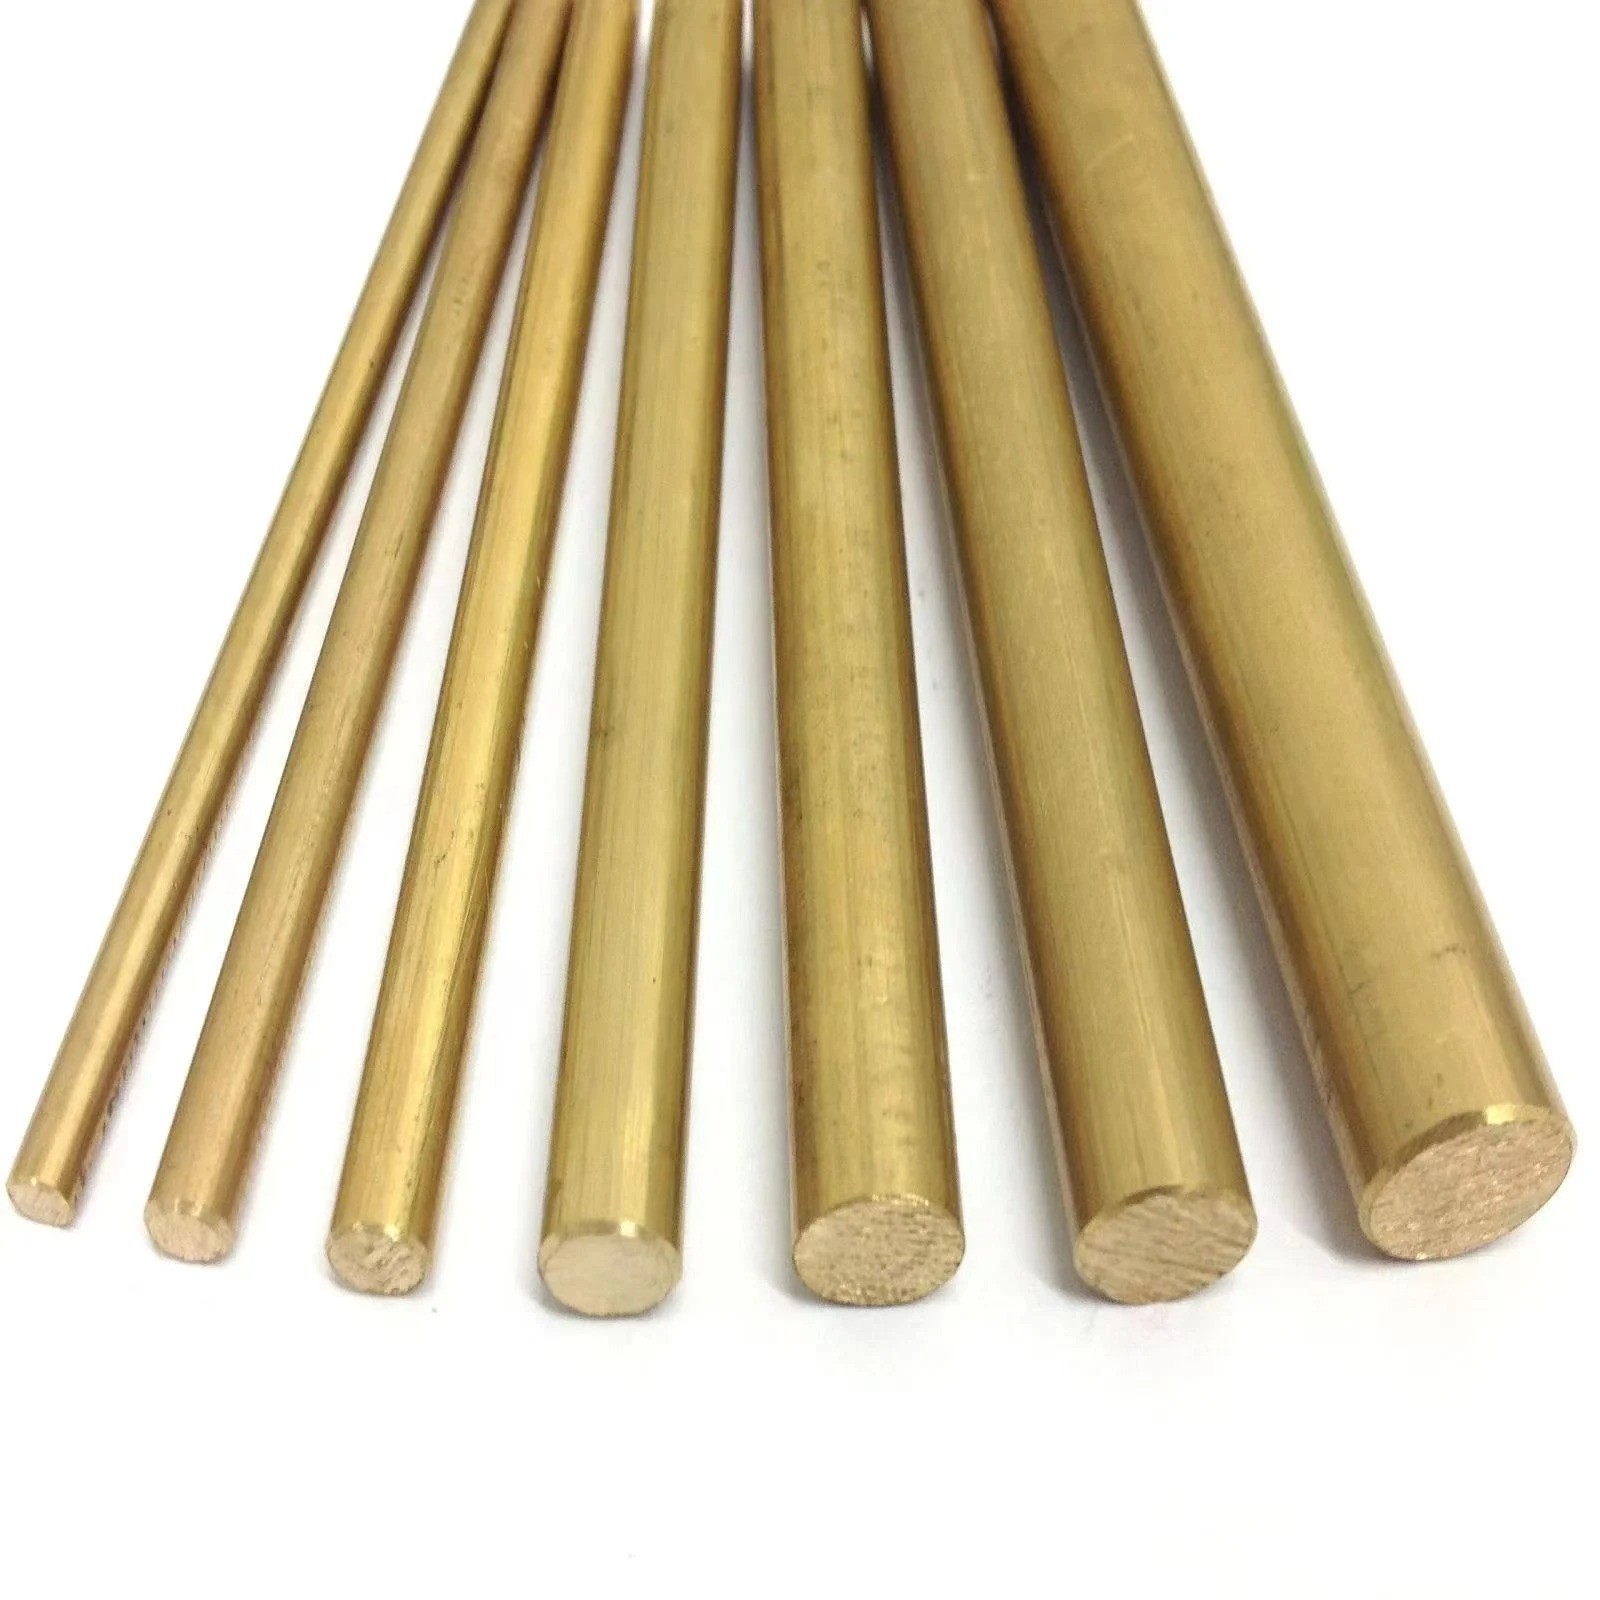 Buy cheap C2700 C2800 Copper Alloy Bar Rod Brush Brass Round C2600 C2680 500mm from wholesalers